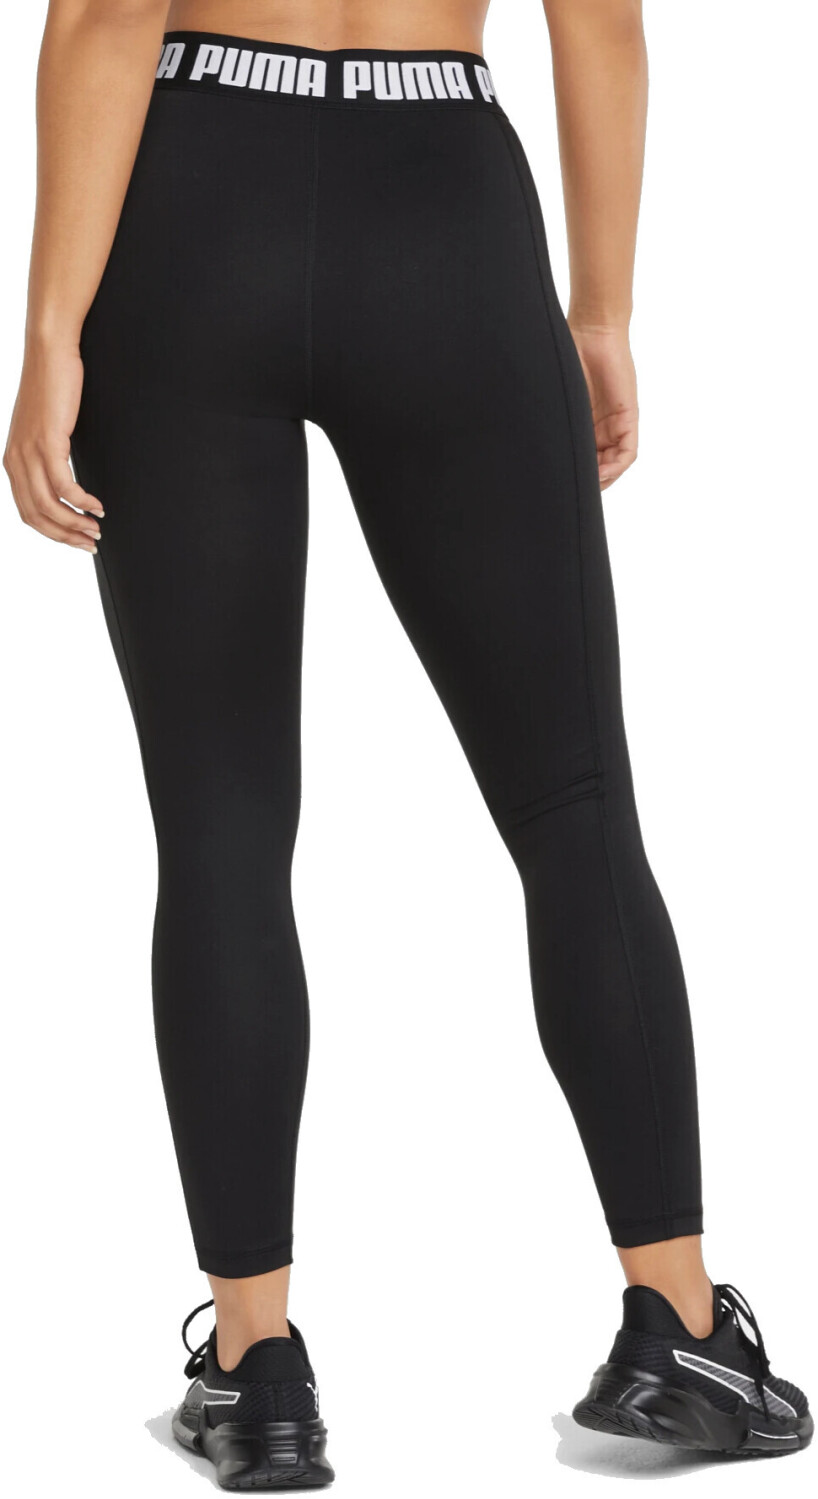 Buy Puma Full Best High Waist – puma £12.00 Leggings Deals black Strong (Today) from on (521601)